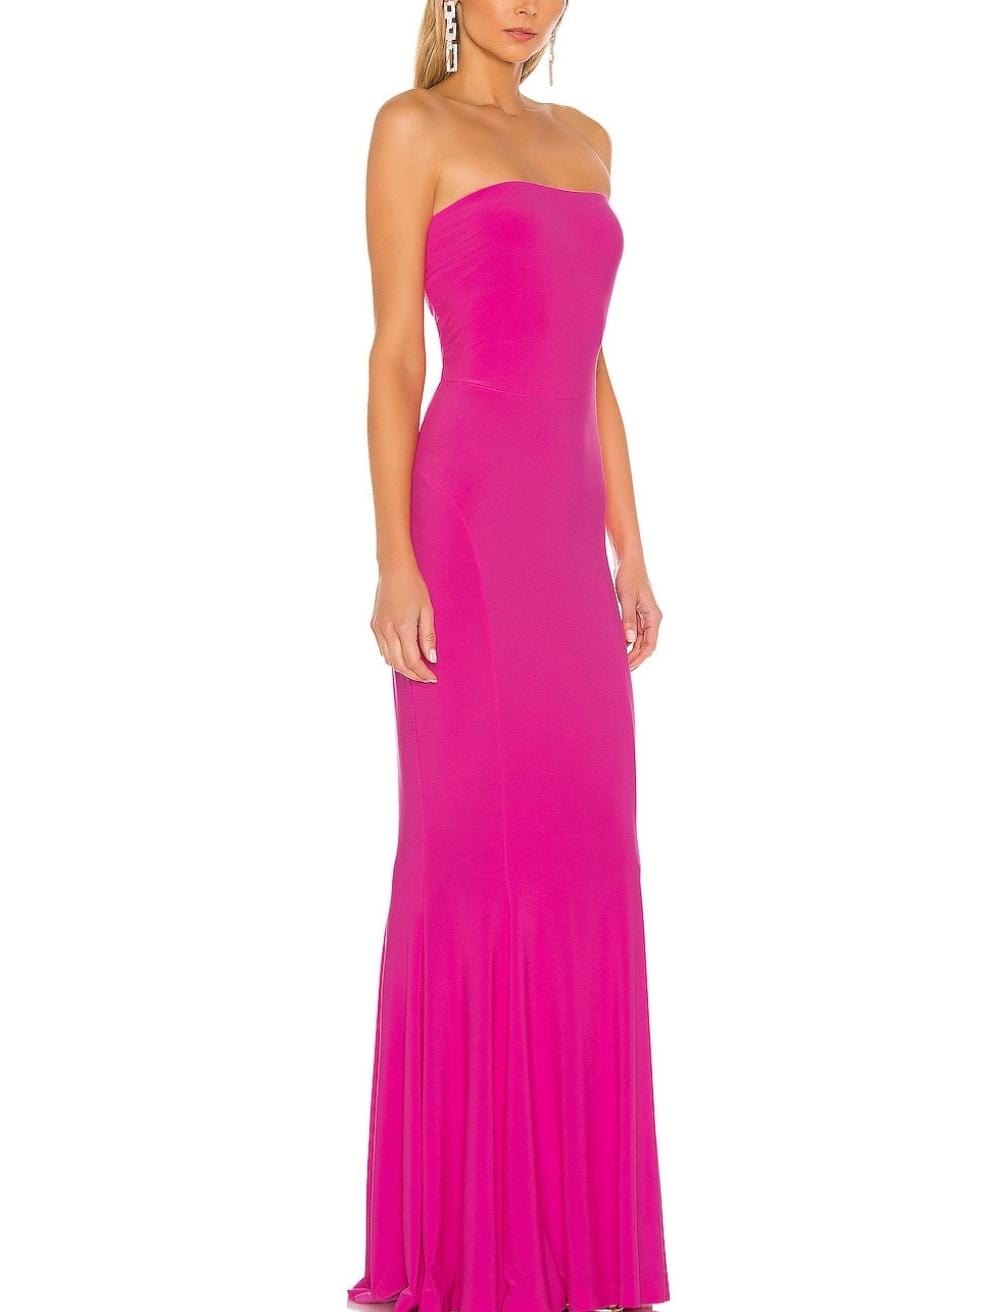 Strapless Fishtail Gown